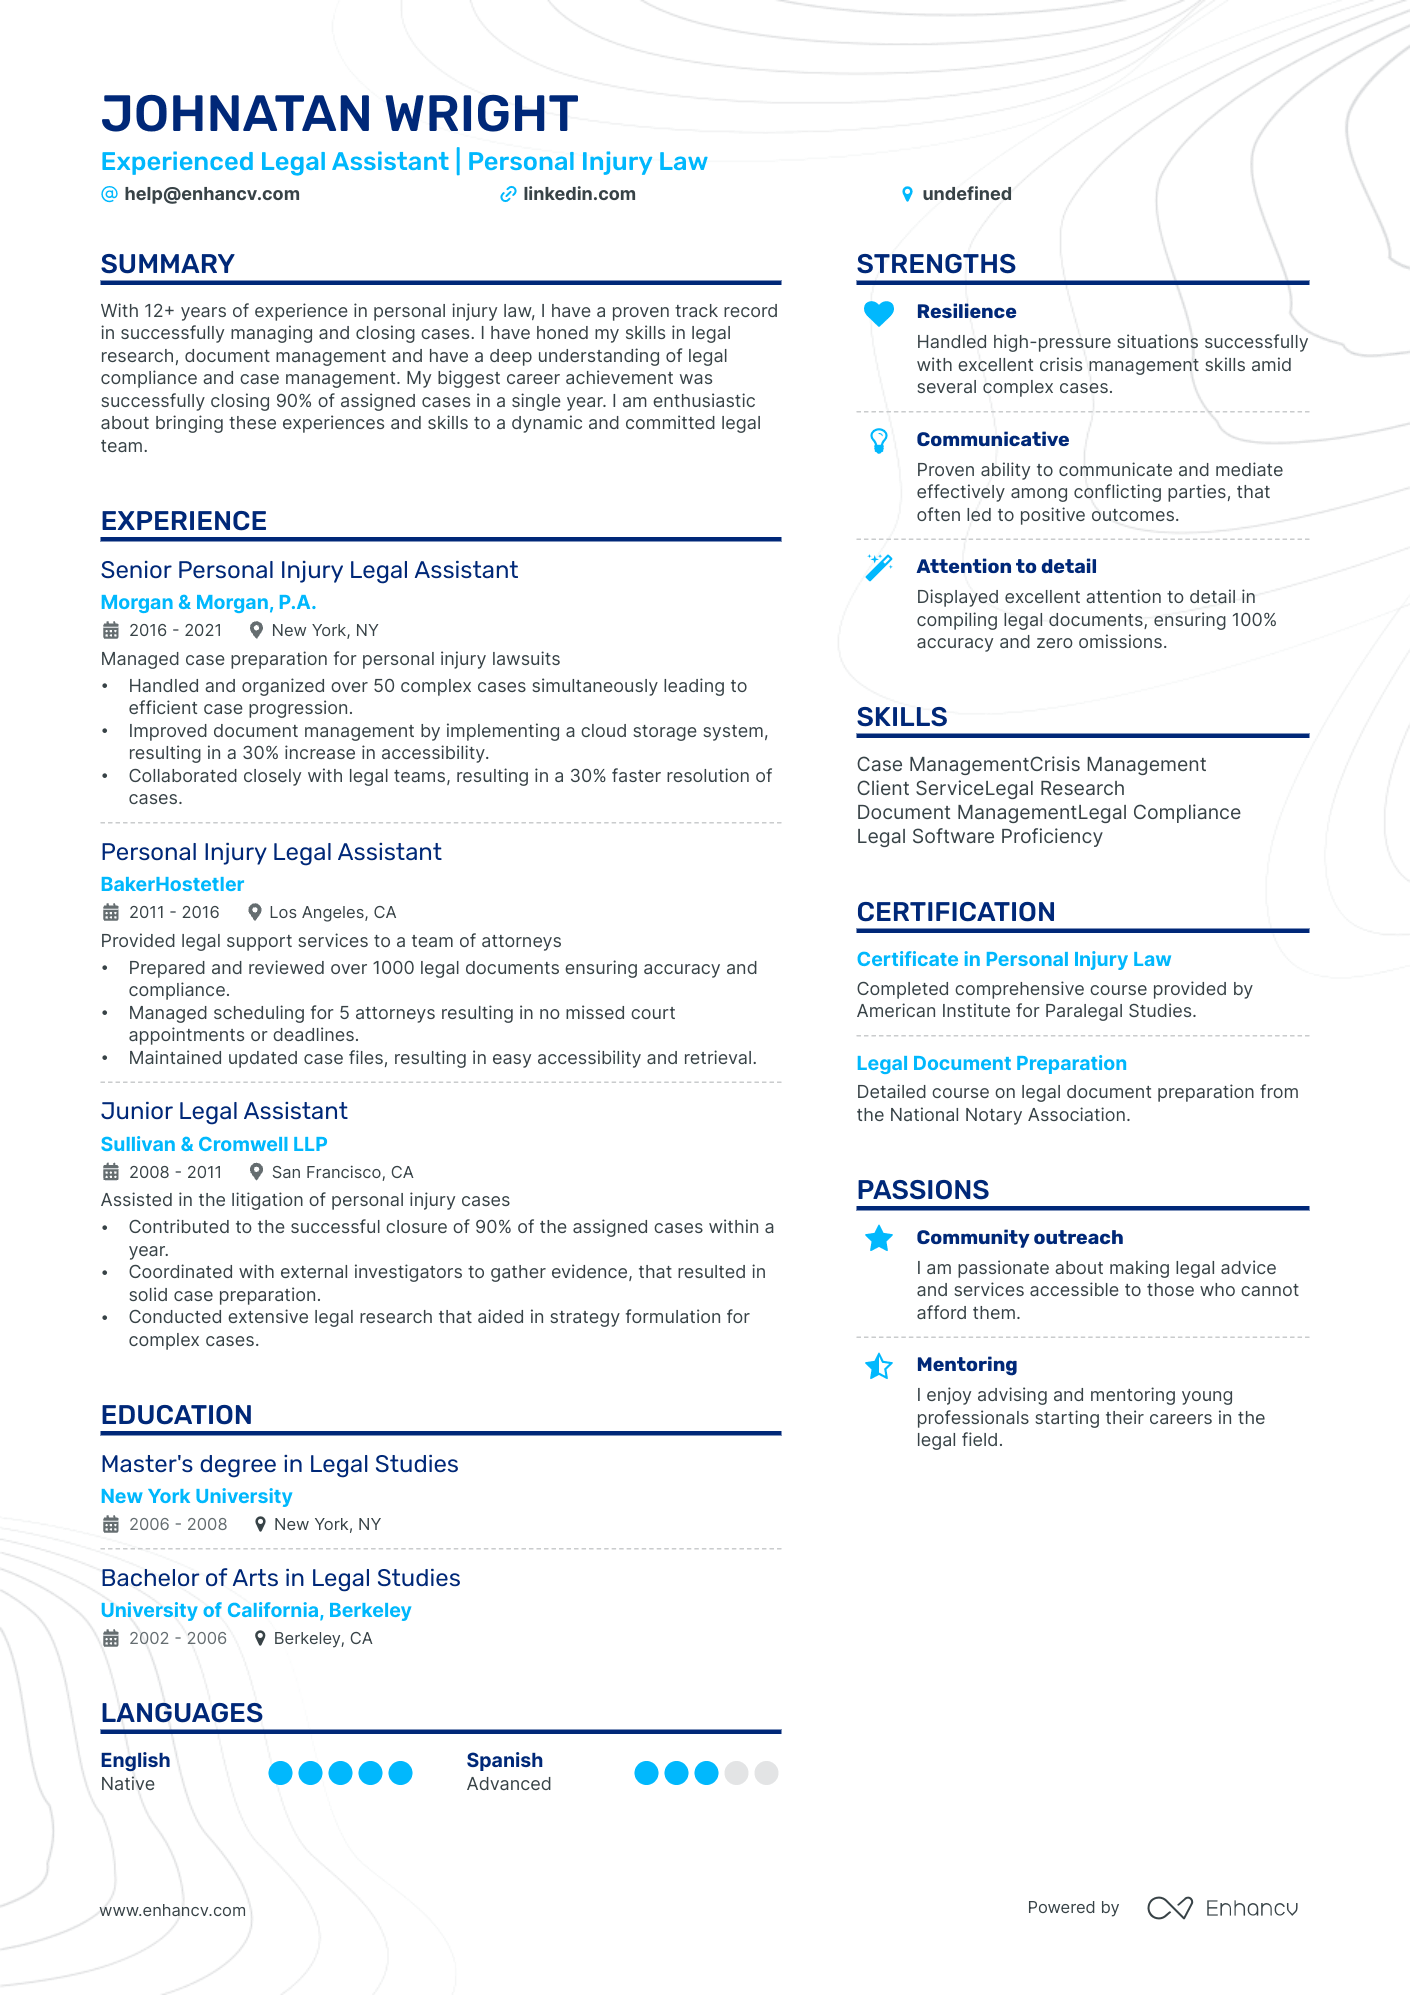 Personal Injury Legal Assistant resume example